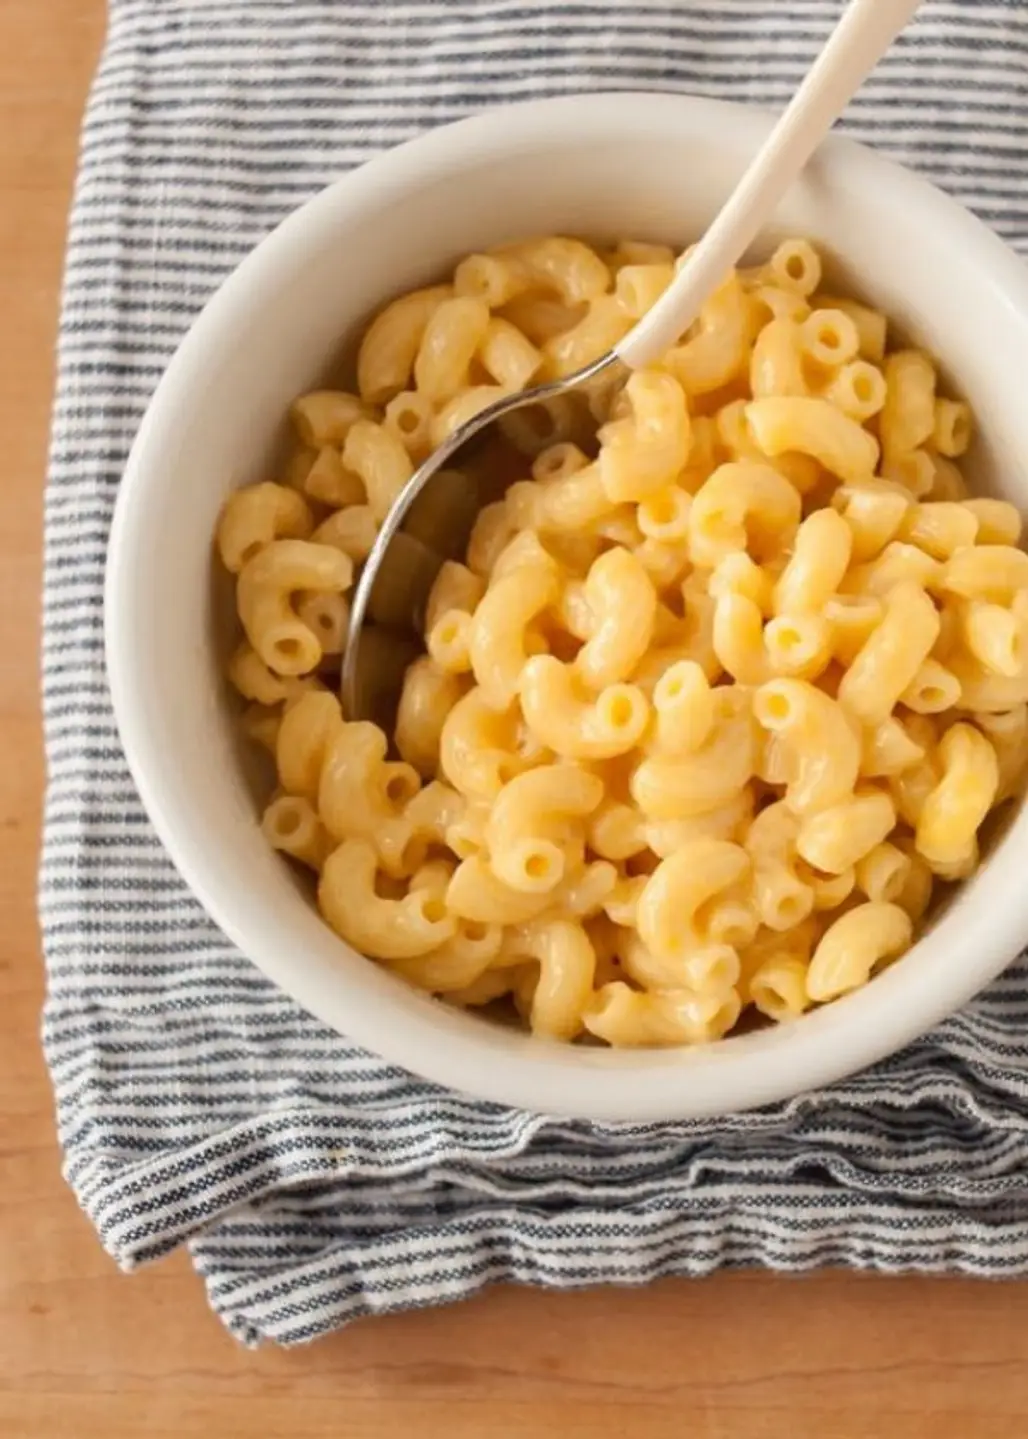 Dish, Cuisine, Food, Macaroni and cheese, Ingredient,